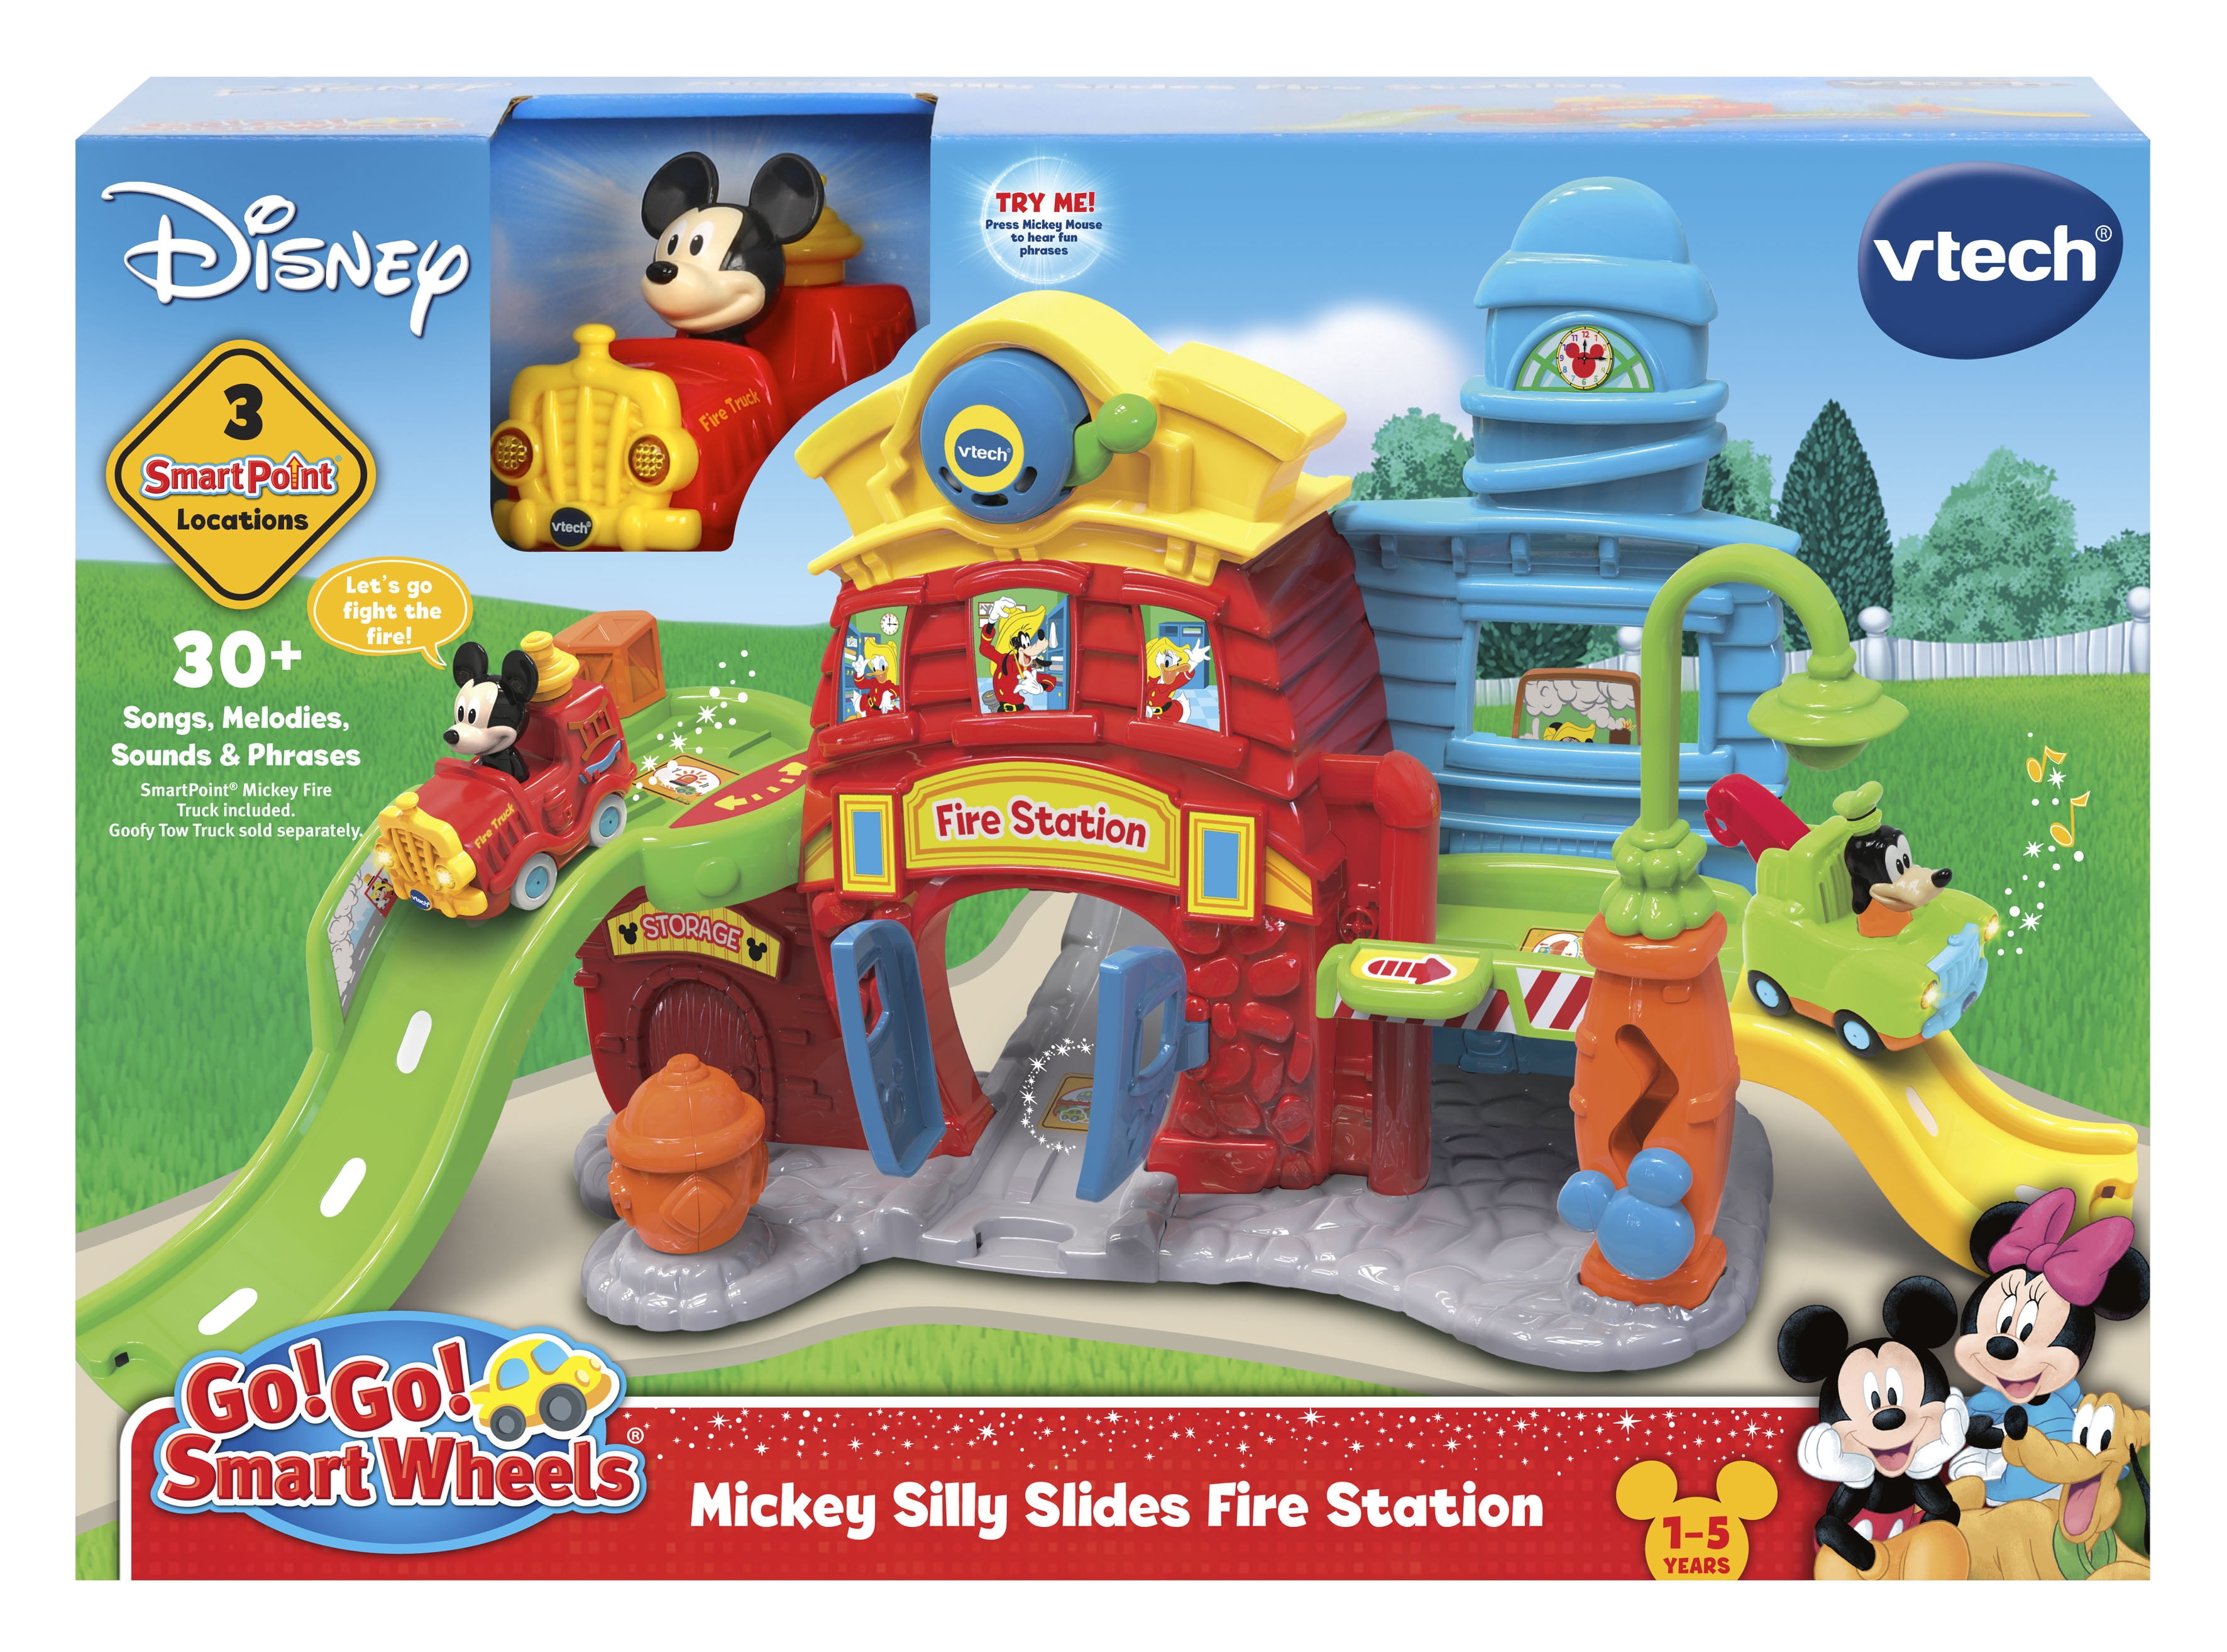 Disney Mickey Mouse Ramps Fun House for sale online VTech Go Smart Wheels 